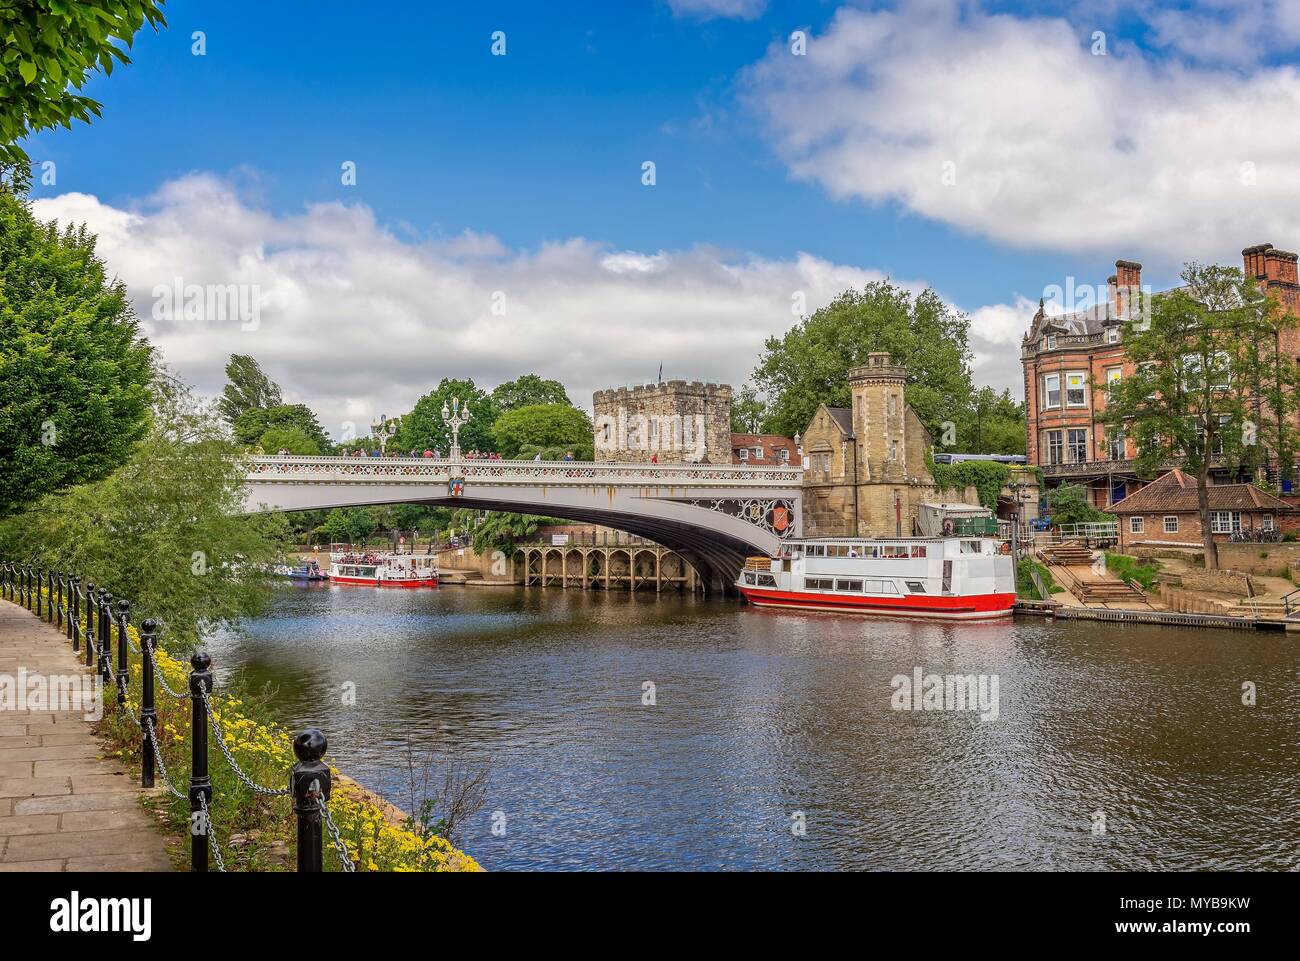 The 19th Century Lendal Bridge in York.  The River Ouse flows underneath with a river bank path in the foreground. Stock Photo